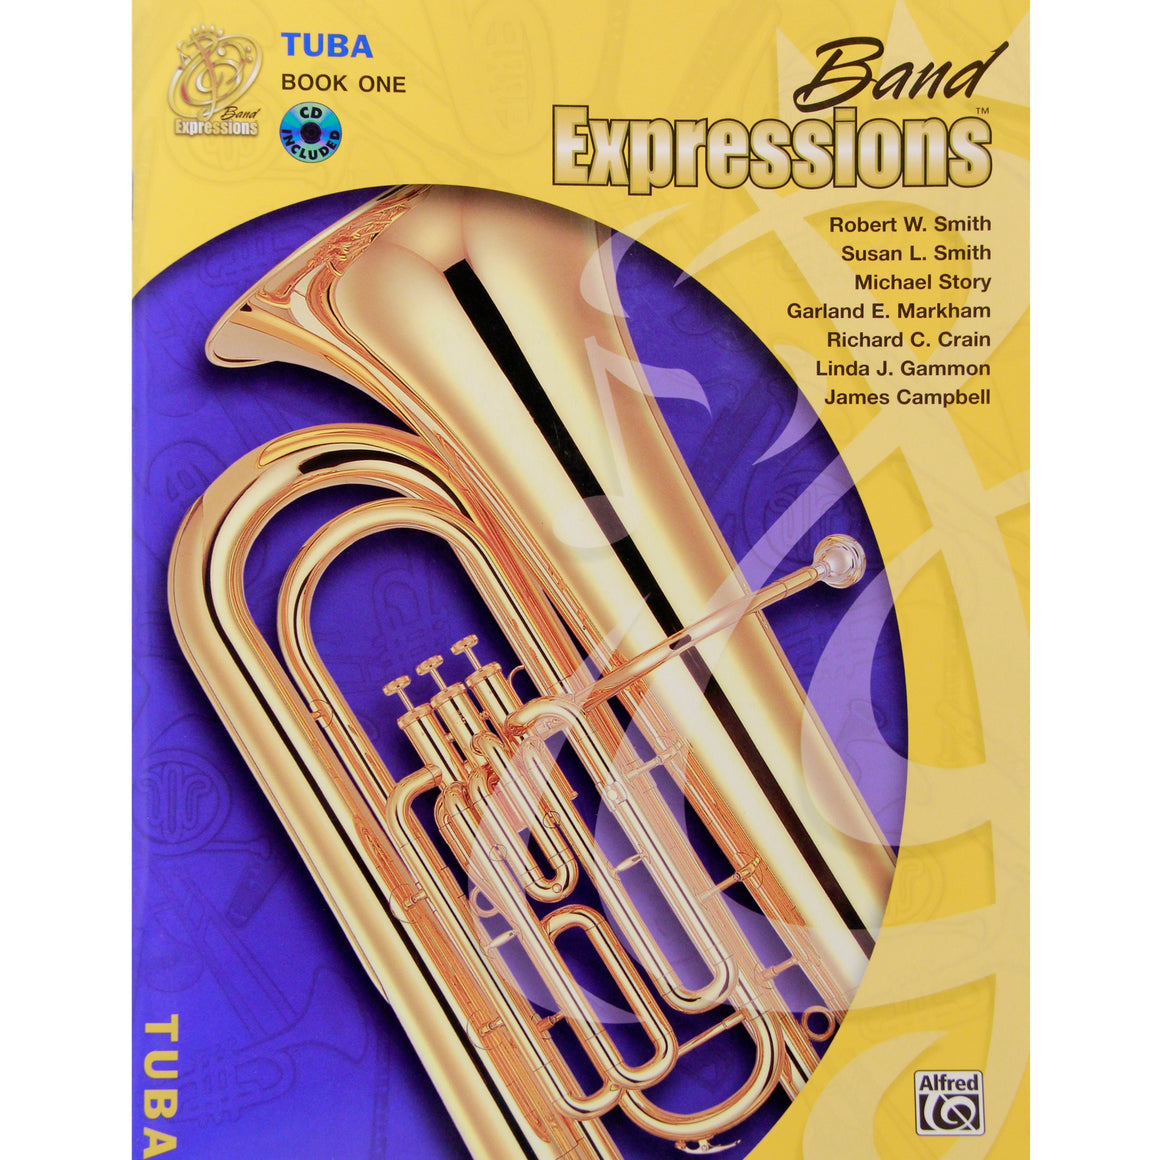 ALFRED 00MCB1015CDX Band Expressions , Book One: Student Edition [Tuba]